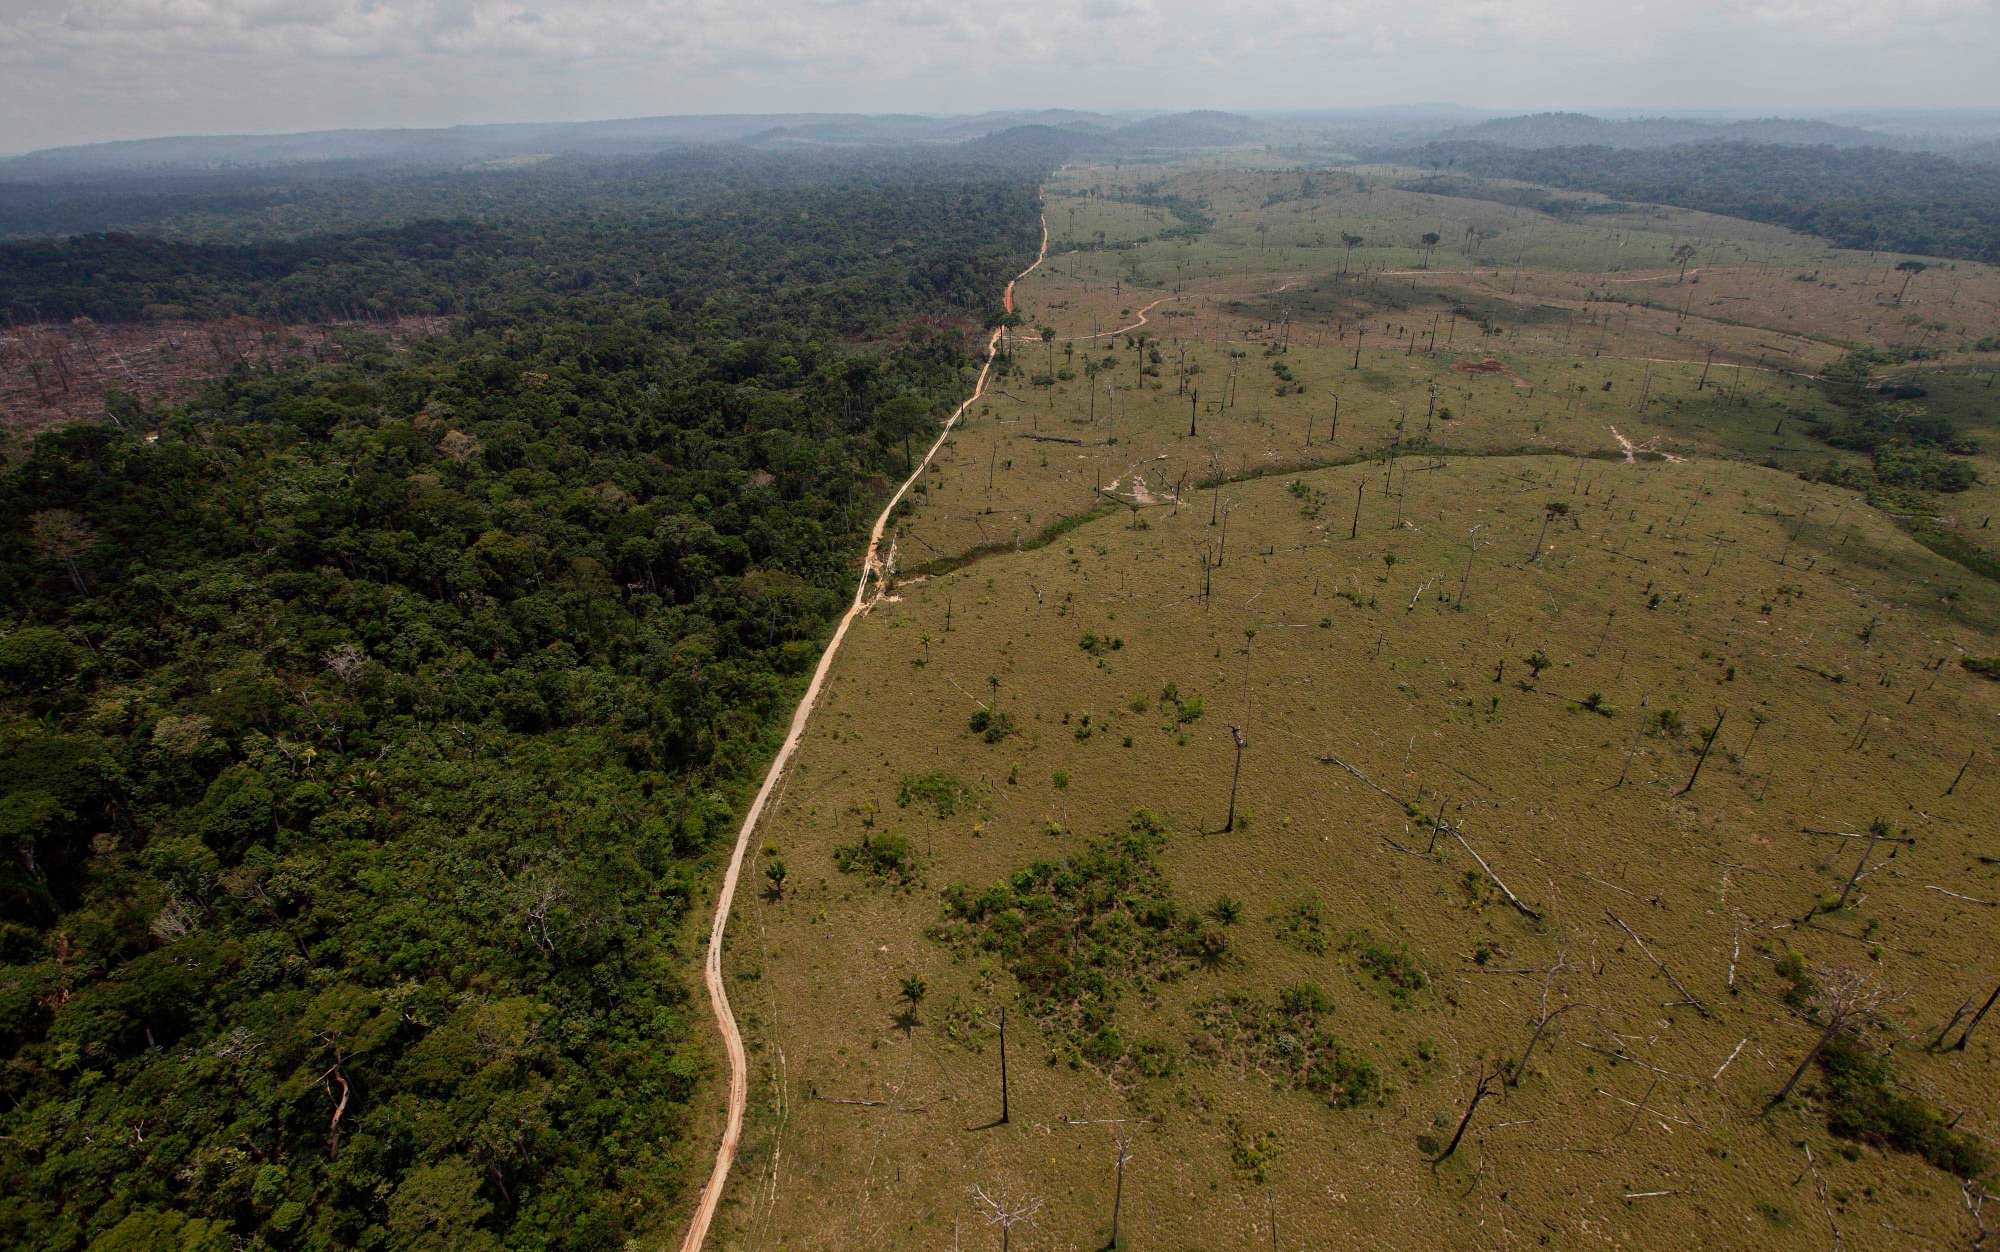 FILE - In this Sept. 15, 2009 file photo, a deforested area is seen near Novo Progresso in Brazil's northern state of Para.  Deforestation in Brazil's Amazon rainforest has dropped to its lowest level in 24 years, the government said Tuesday, Nov. 27, 2012. (AP Photo/Andre Penner, File) Brazil Deforestation